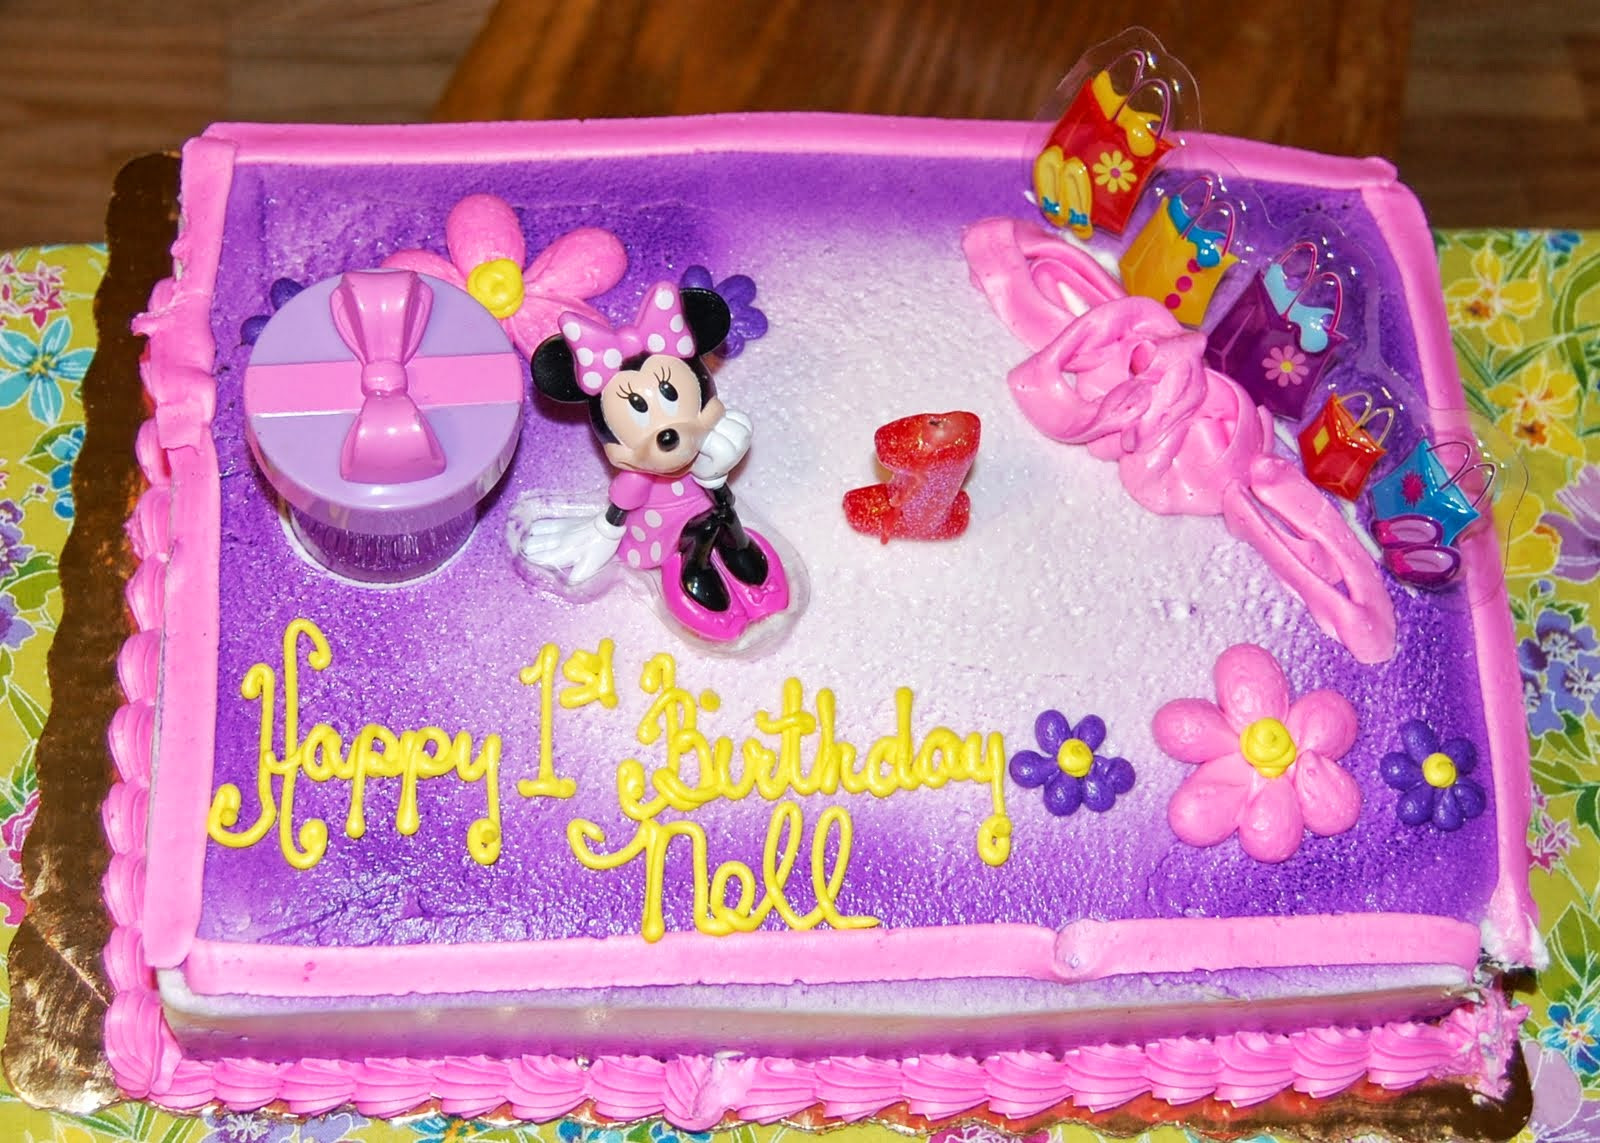 The Best Ideas for Publix Bakery Birthday Cakes - Publix Bakery BirthDay Cakes Beautiful Publix BirthDay Cakes Of Publix Bakery BirthDay Cakes